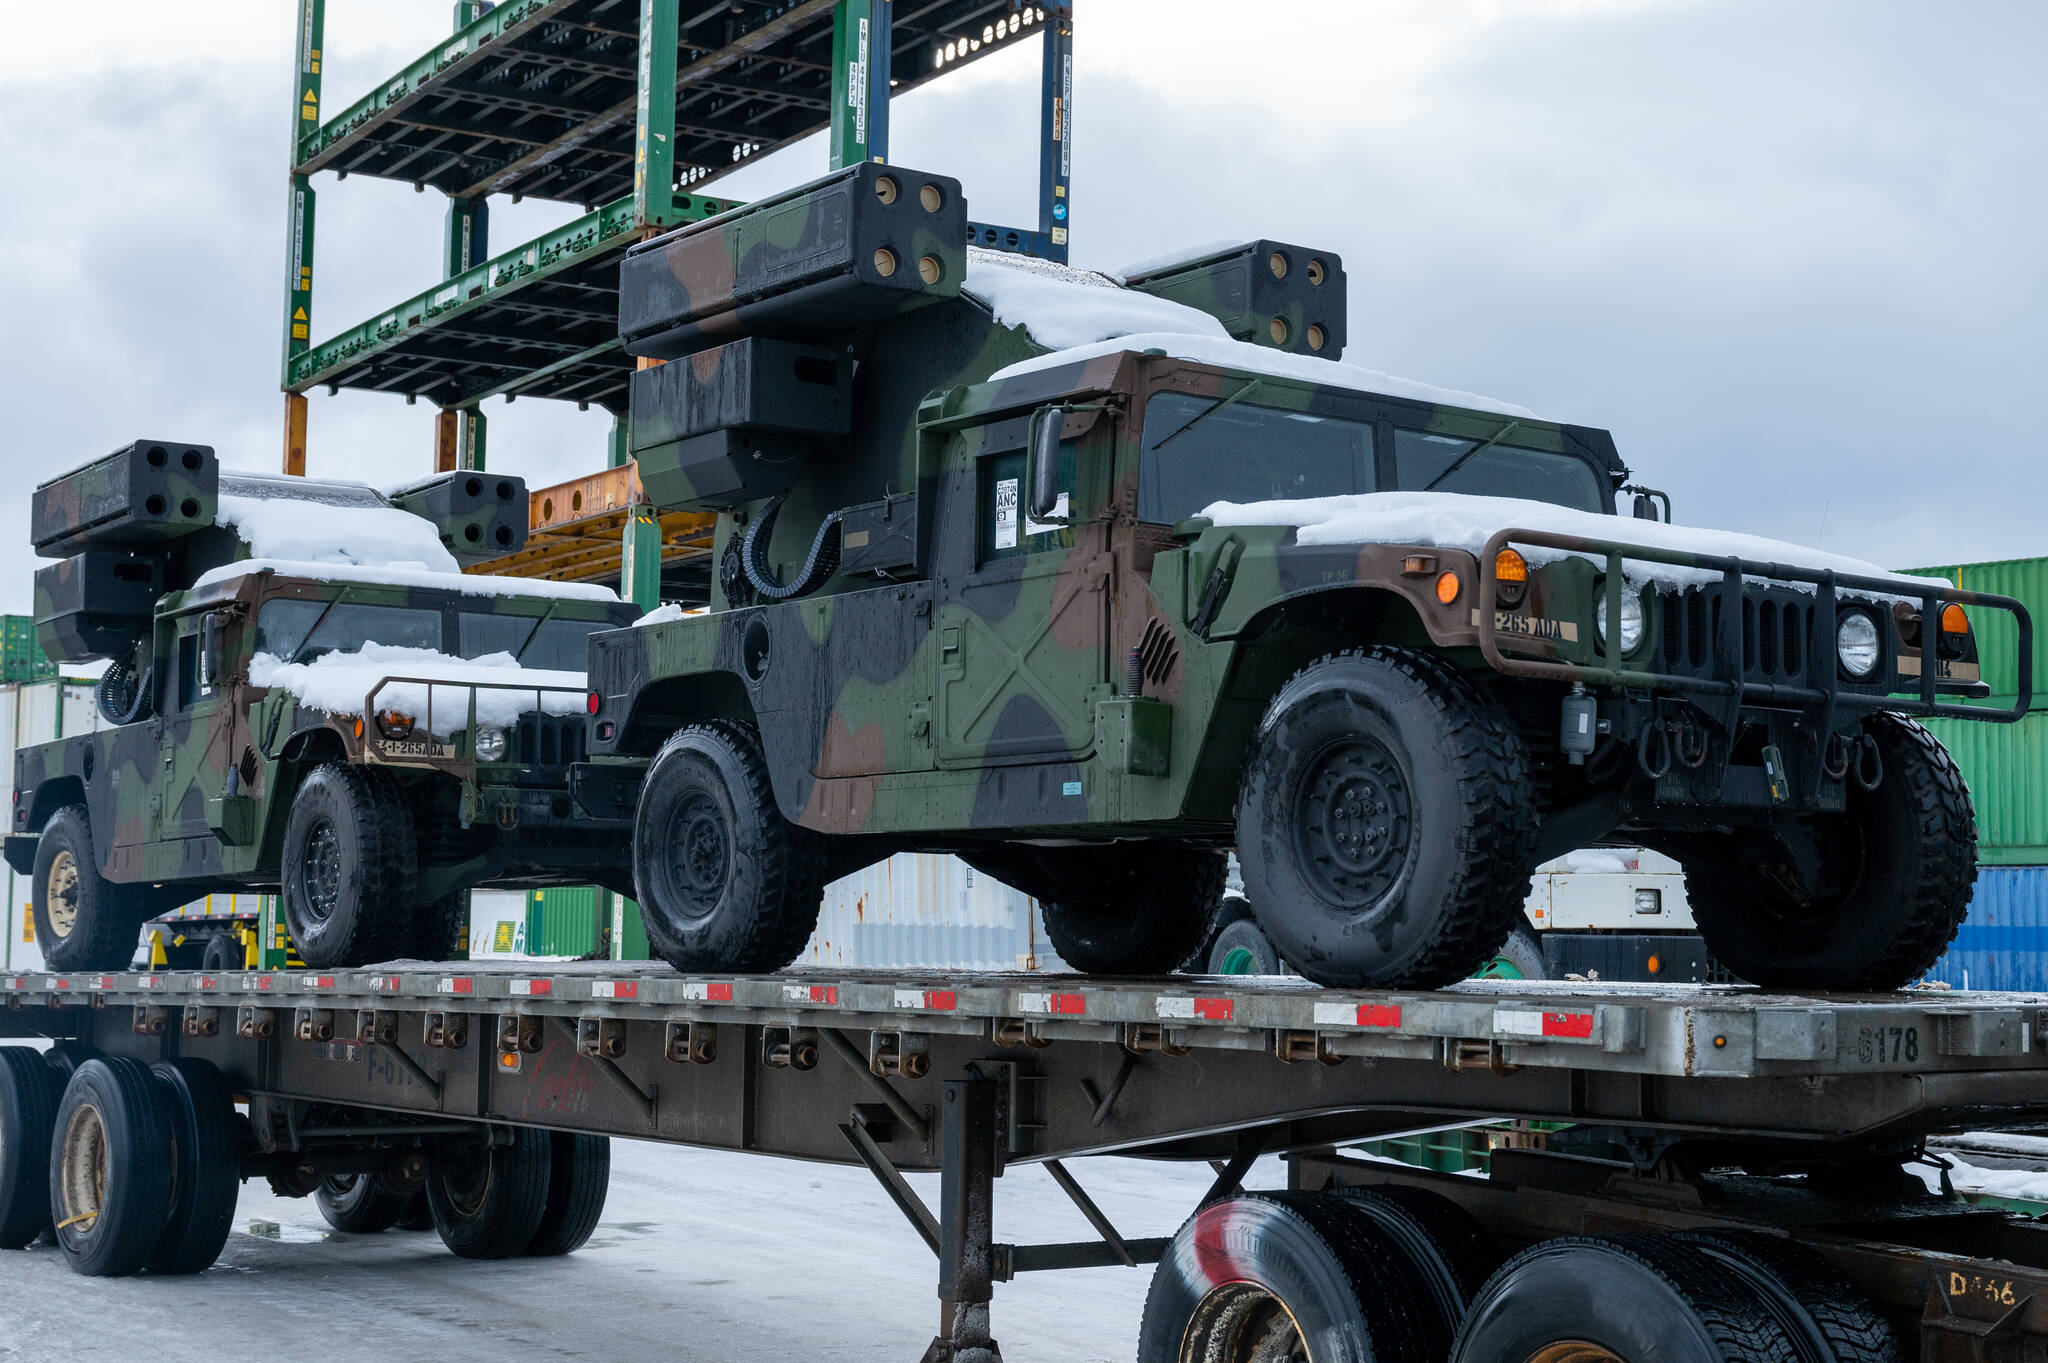 Two Avenger Air Defense Systems sit on a flatbed trailer at the Port of Anchorage, Anchorage, Alaska, Feb. 25, 2022 for exercise Arctic Edge 2022. (U.S. Air Force photo / Airman 1st Class Andrew Britten)